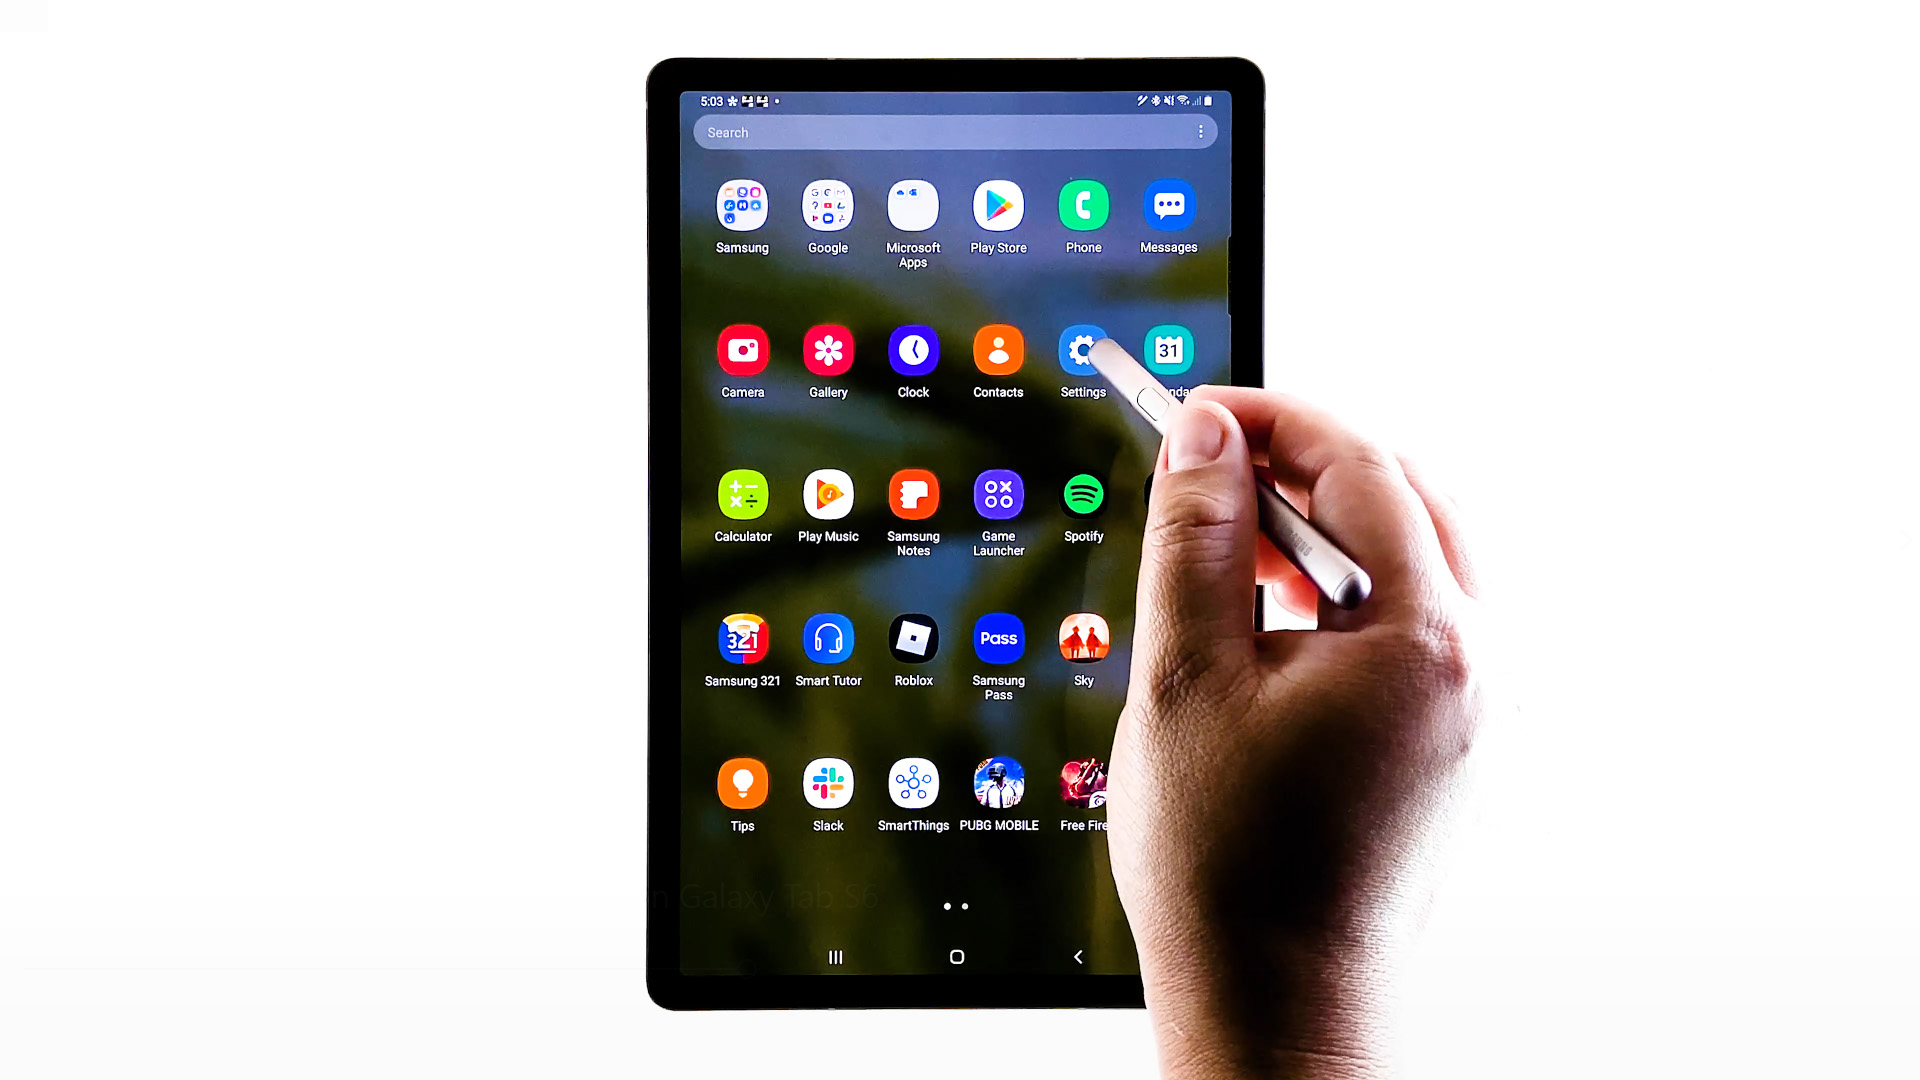 hide apps from tab s6 home screen - settings